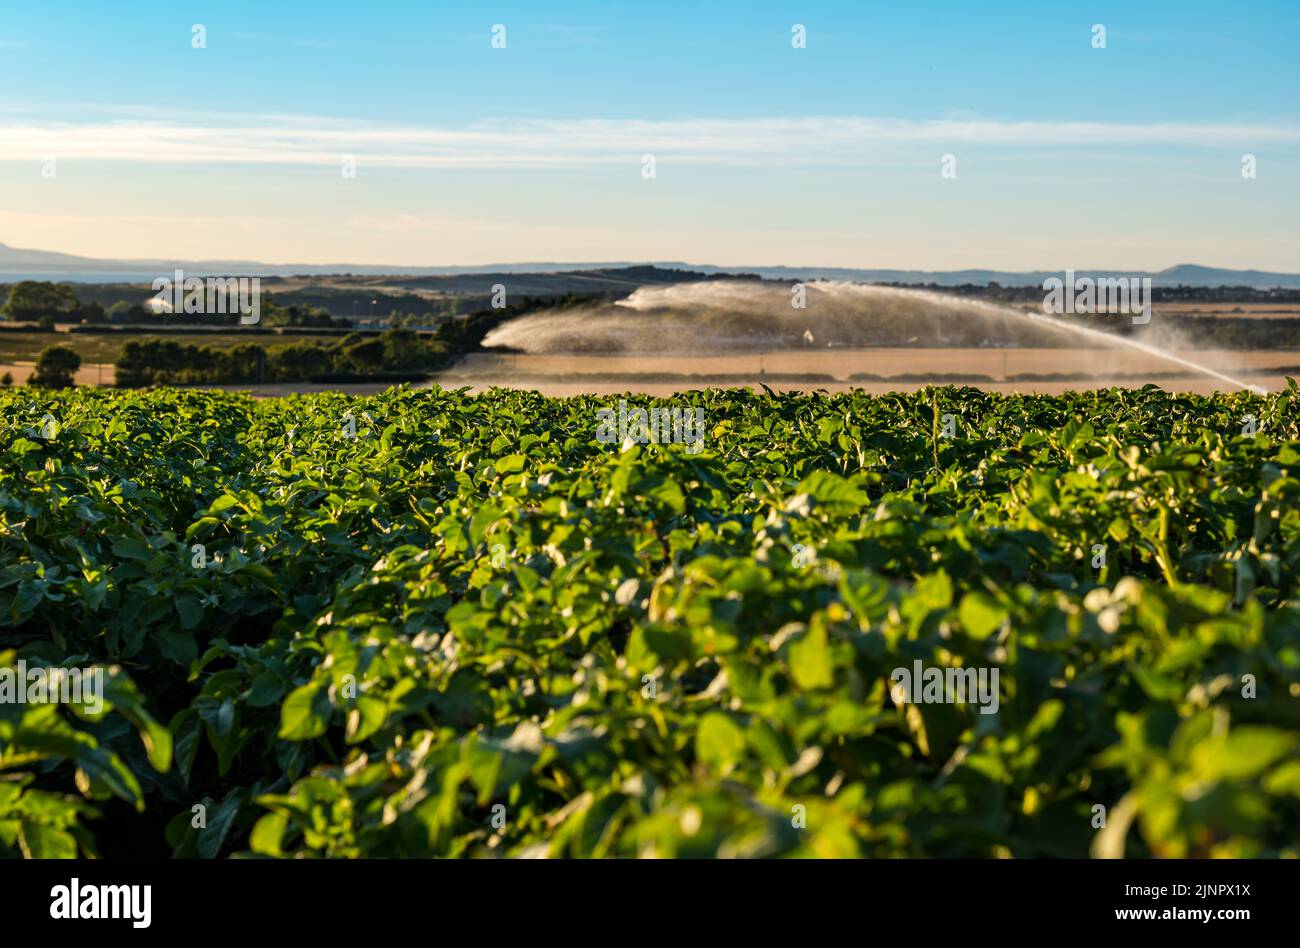 Potato plant crop being watered with jet hose during Summer drought heatwave, East Lothian, Scotland, UK Stock Photo